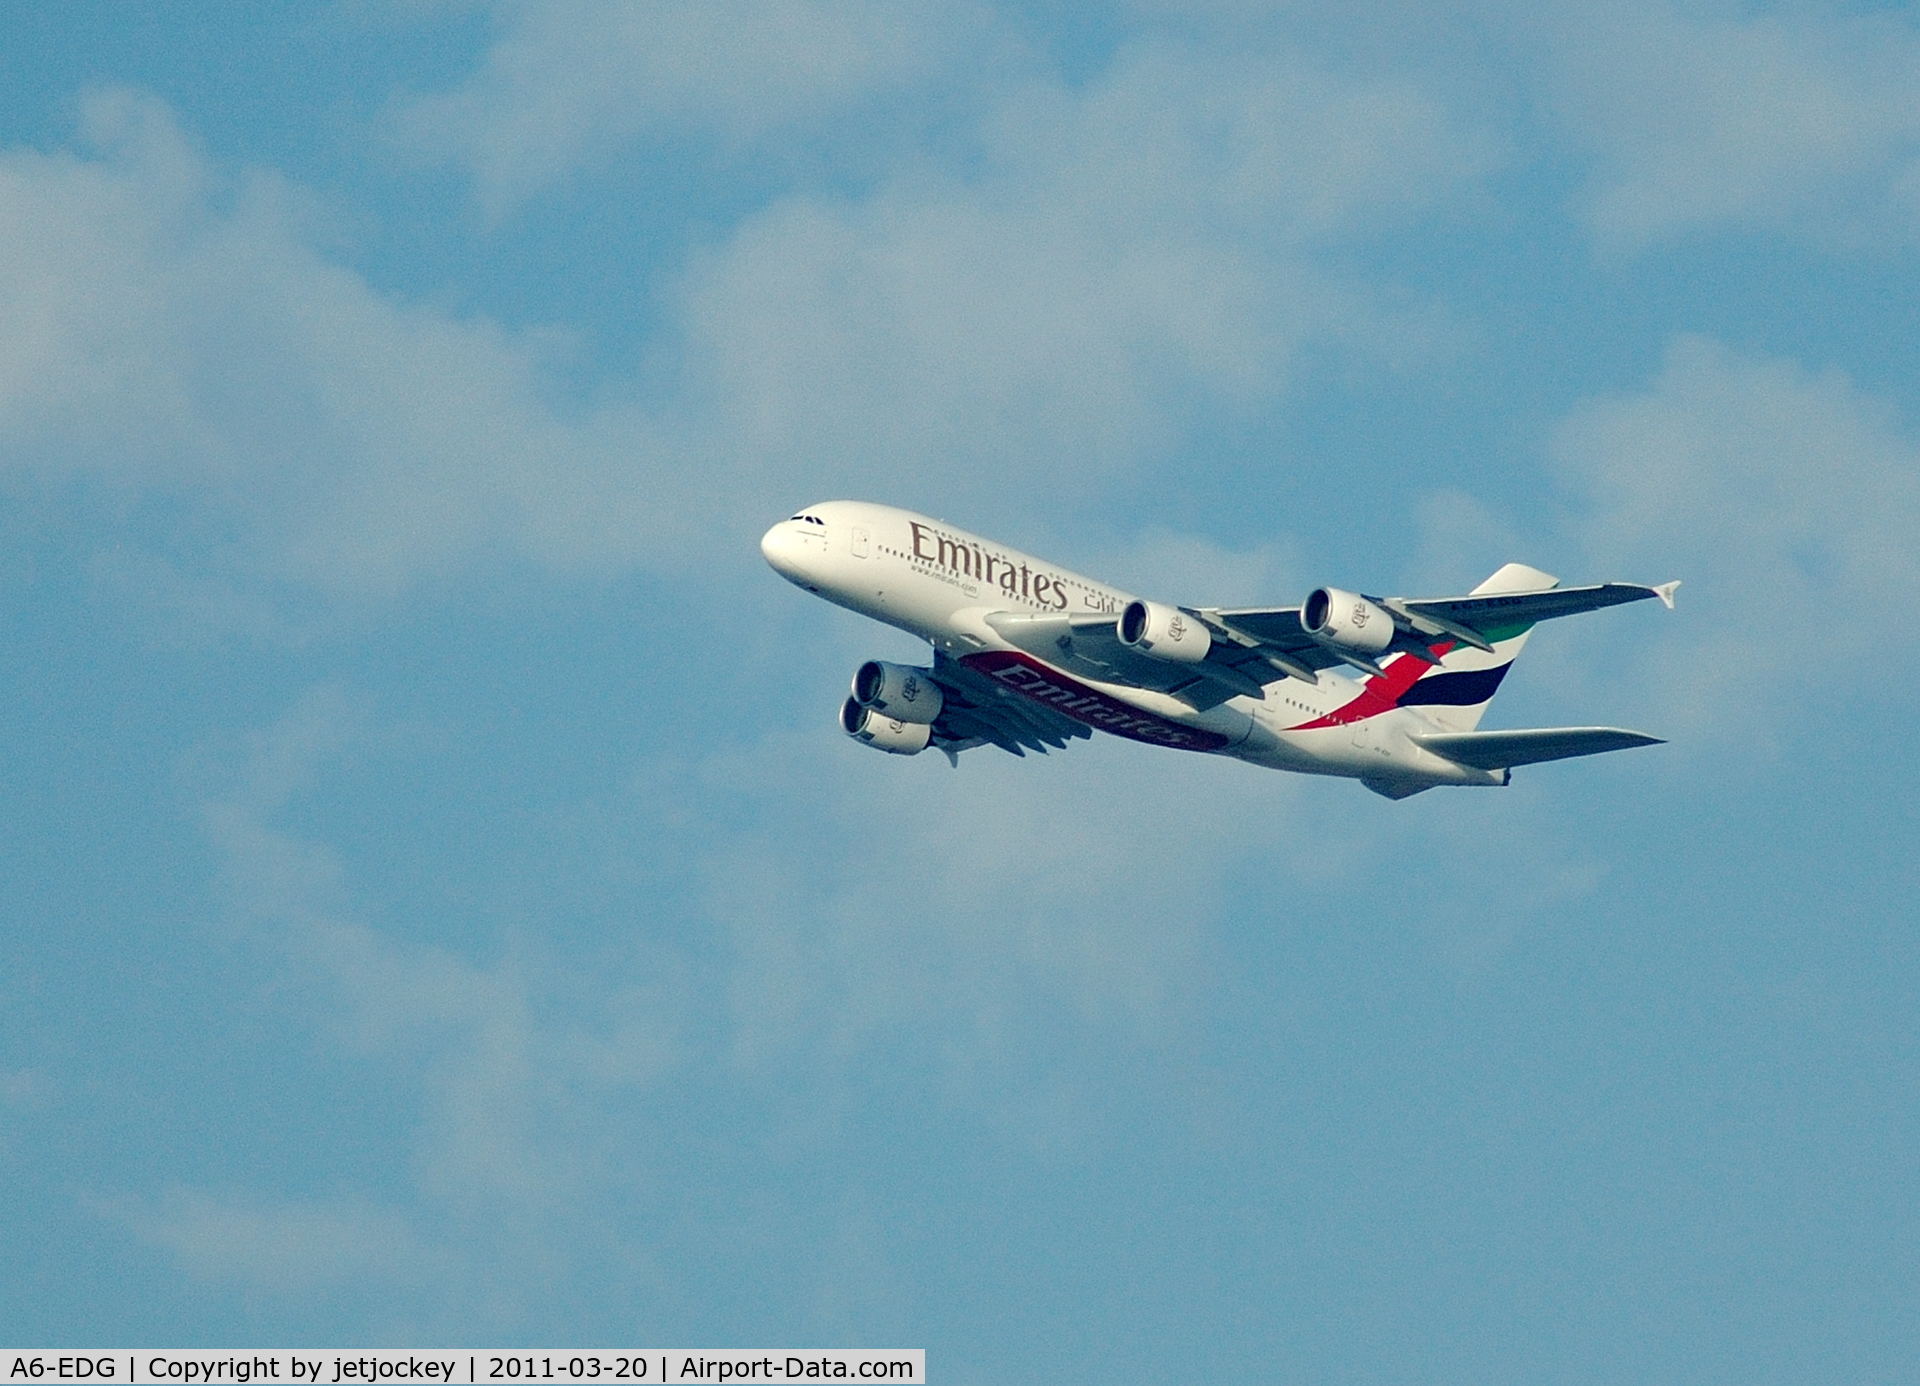 A6-EDG, 2009 Airbus A380-861 C/N 023, Climbing out over Dubai port from DBX